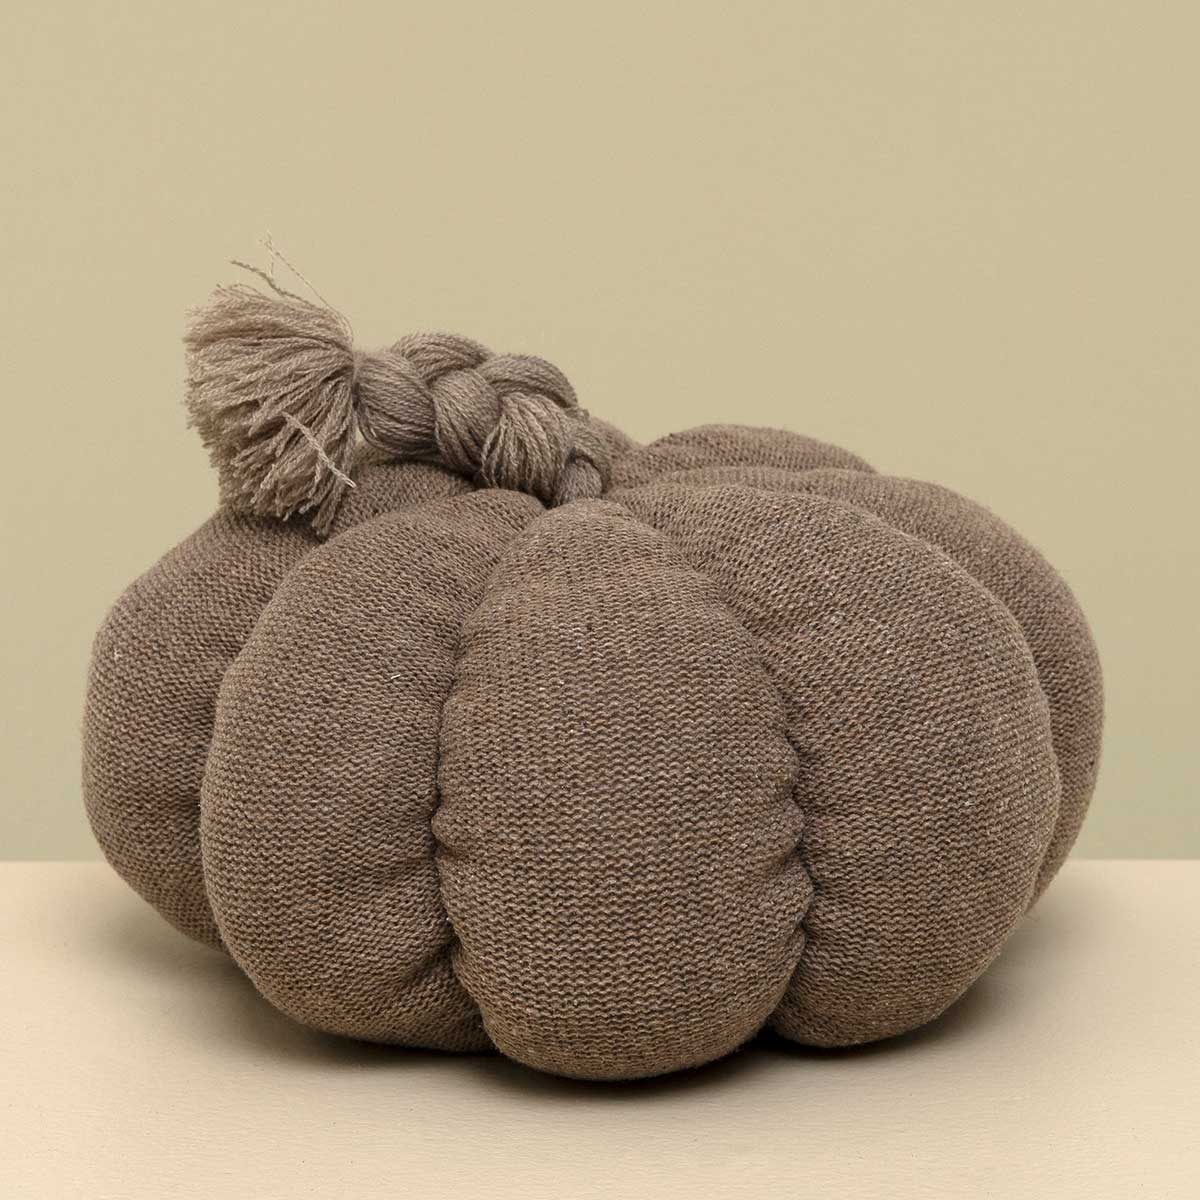 KNIT PUMPKIN PLUSH TAUPE WITH BRAIDED STEM EXTRA LARGE